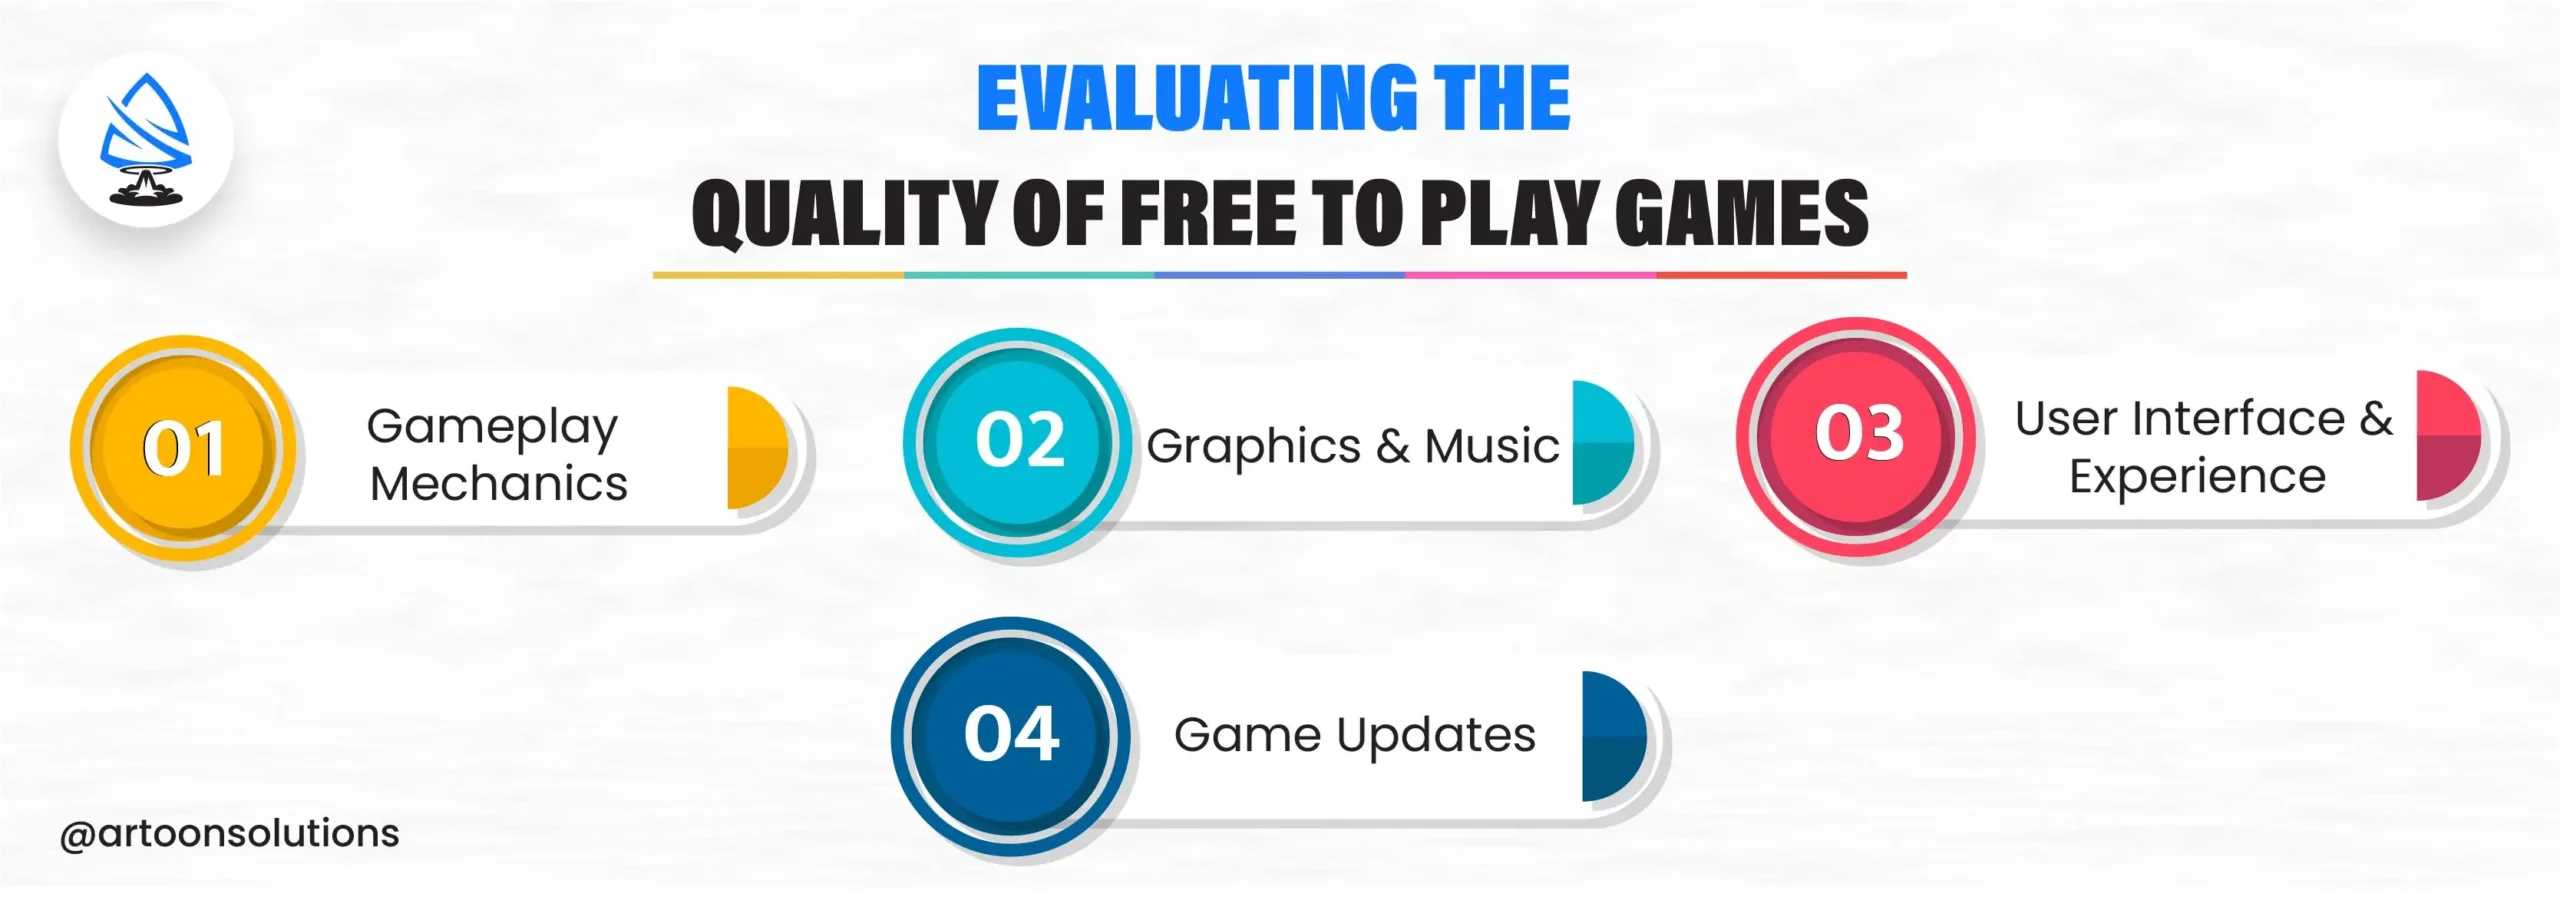 Evaluating the Quality of Free to Play Games